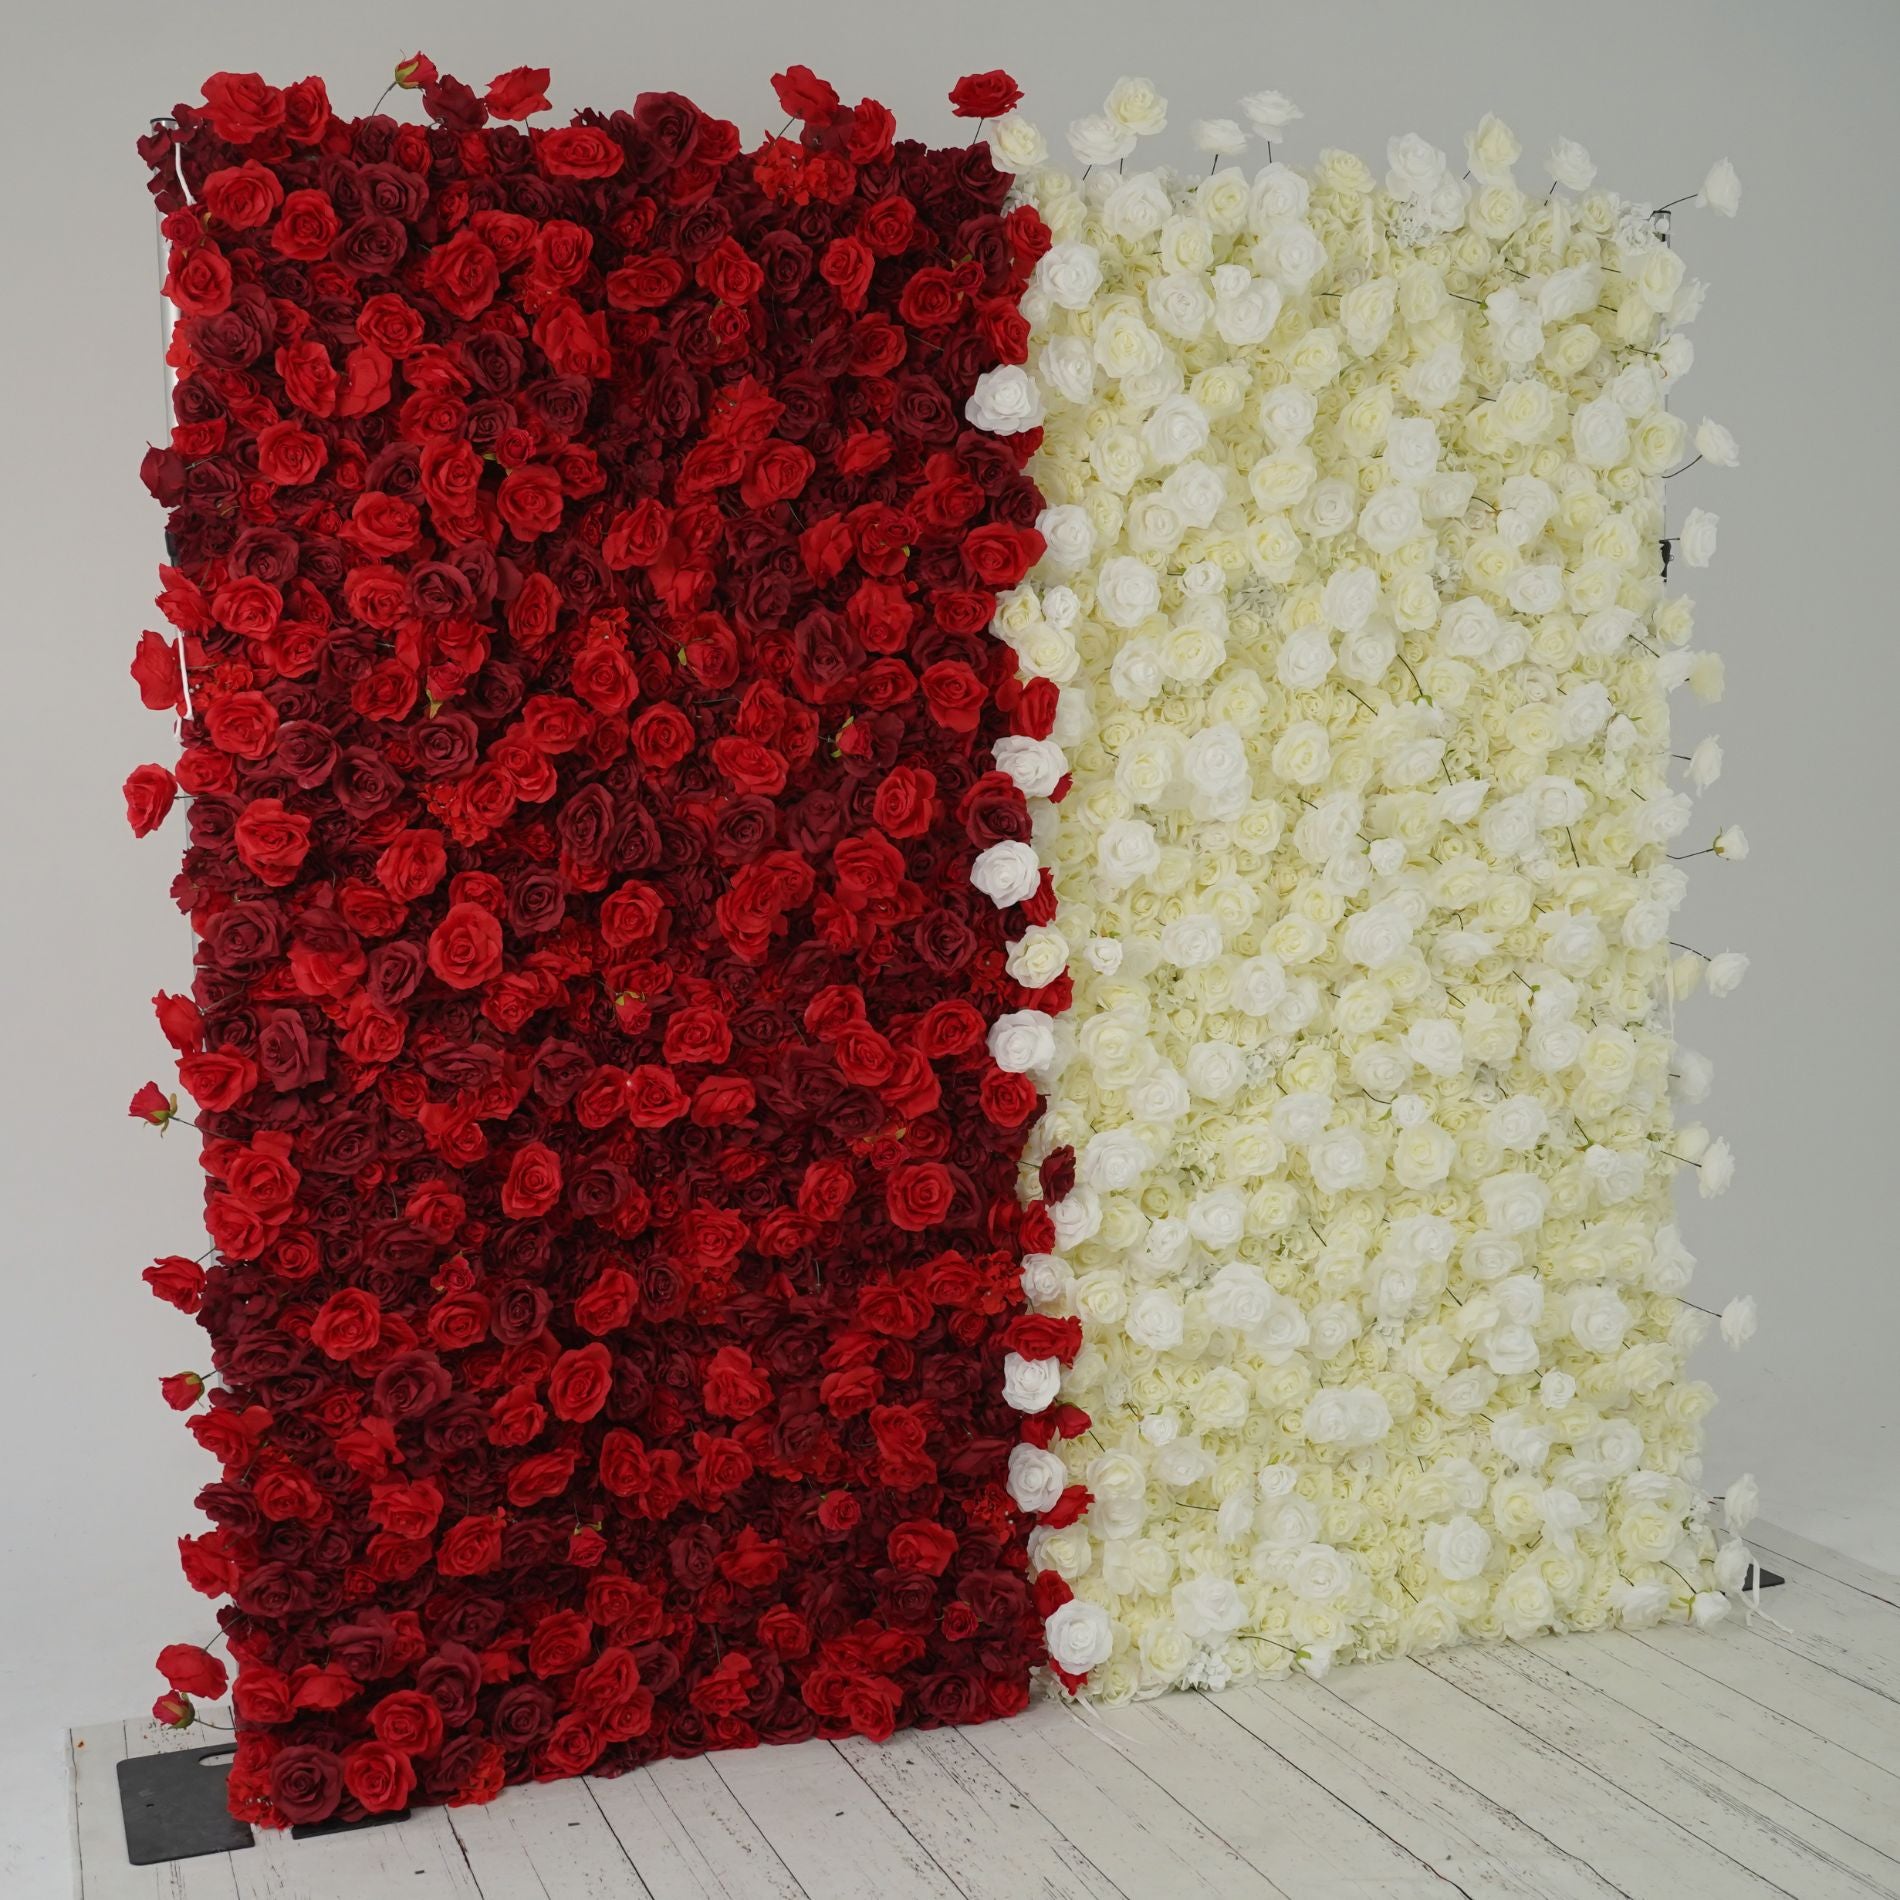 Flower Wall Red and White Roses Fabric Rolling Up Curtain Floral Backdrop Wedding Party Proposal Decor